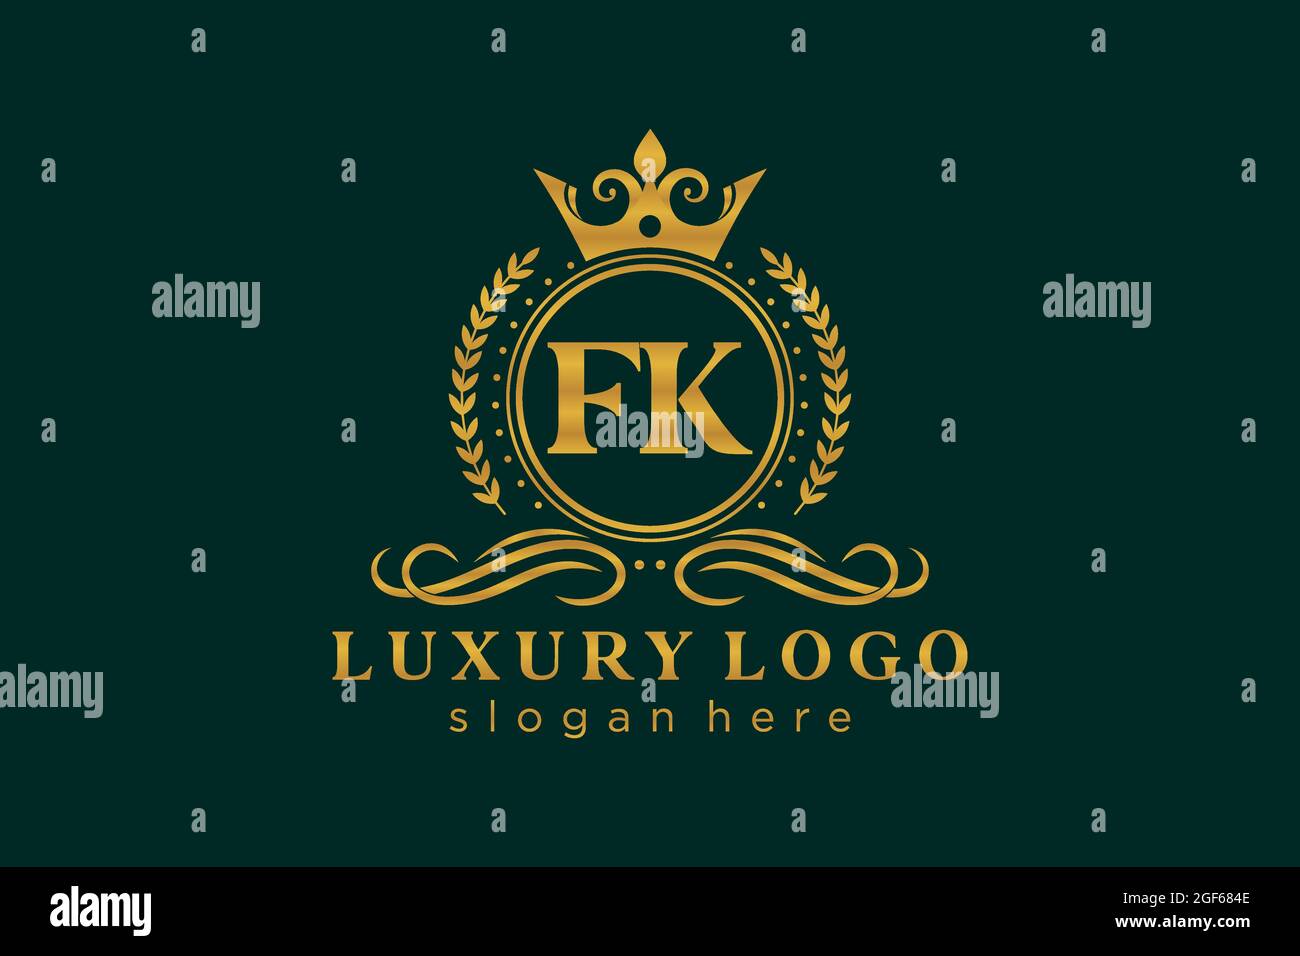 FK Letter Royal Luxury Logo template in vector art for Restaurant, Royalty, Boutique, Cafe, Hotel, Heraldic, Jewelry, Fashion and other vector illustr Stock Vector